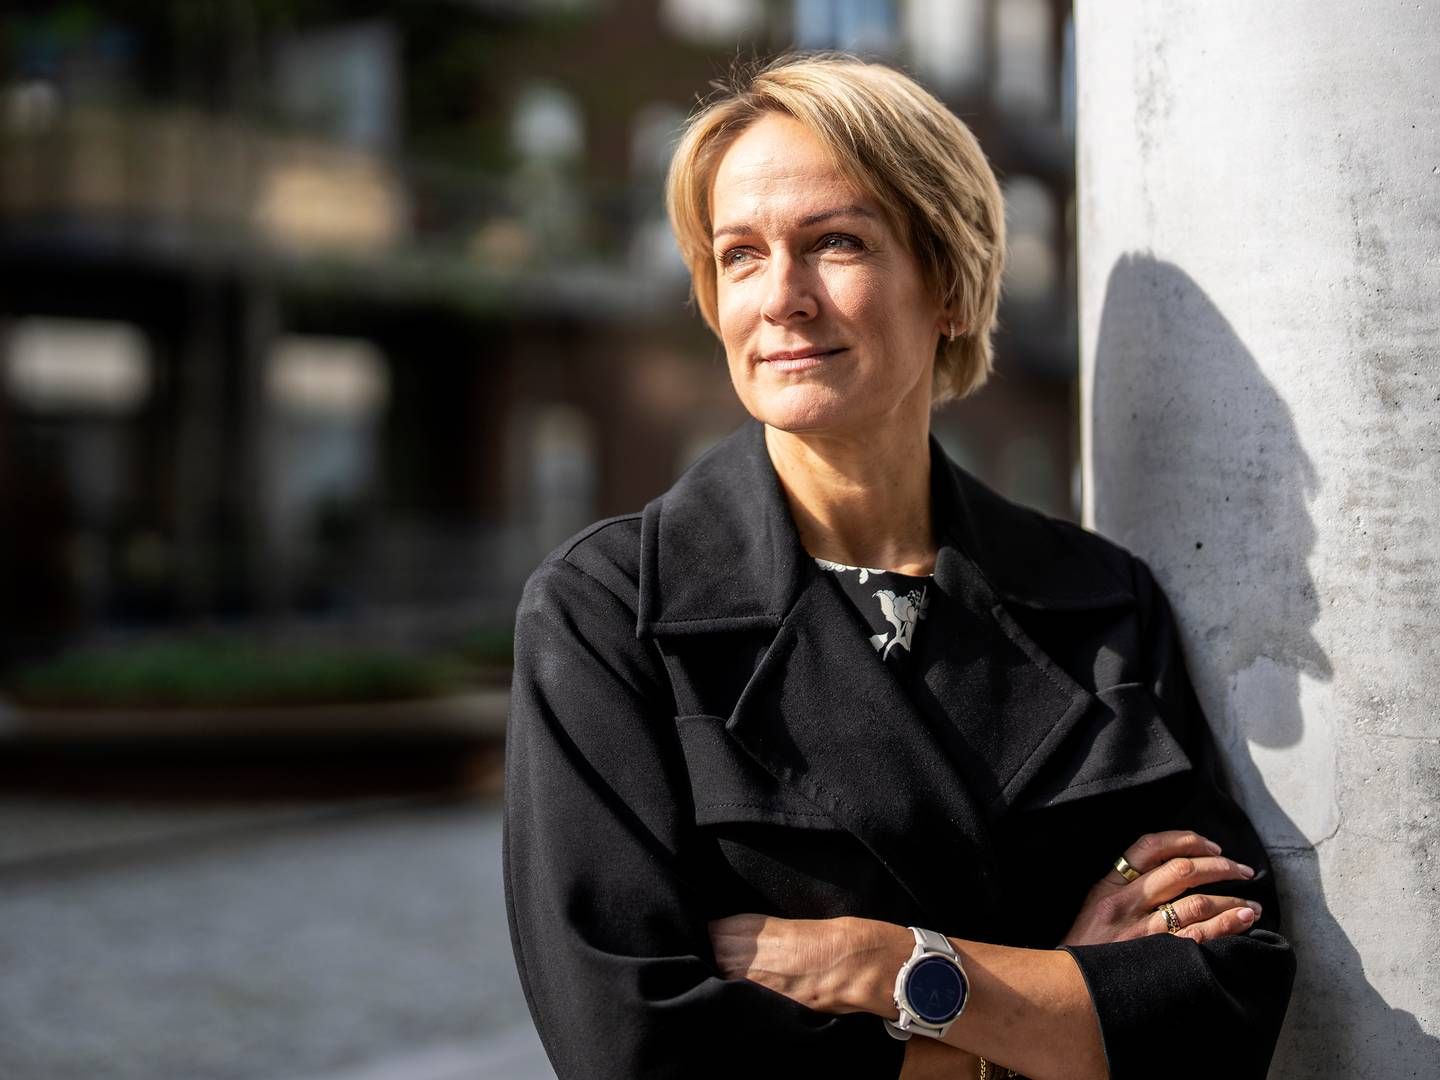 ”To reach net-zero, we need to bring affordable, reliable, and clean energy to all parts of the world," says Christina Grumstrup Sørensen, senior partner and founder of CIP. | Photo: Stine Bidstrup